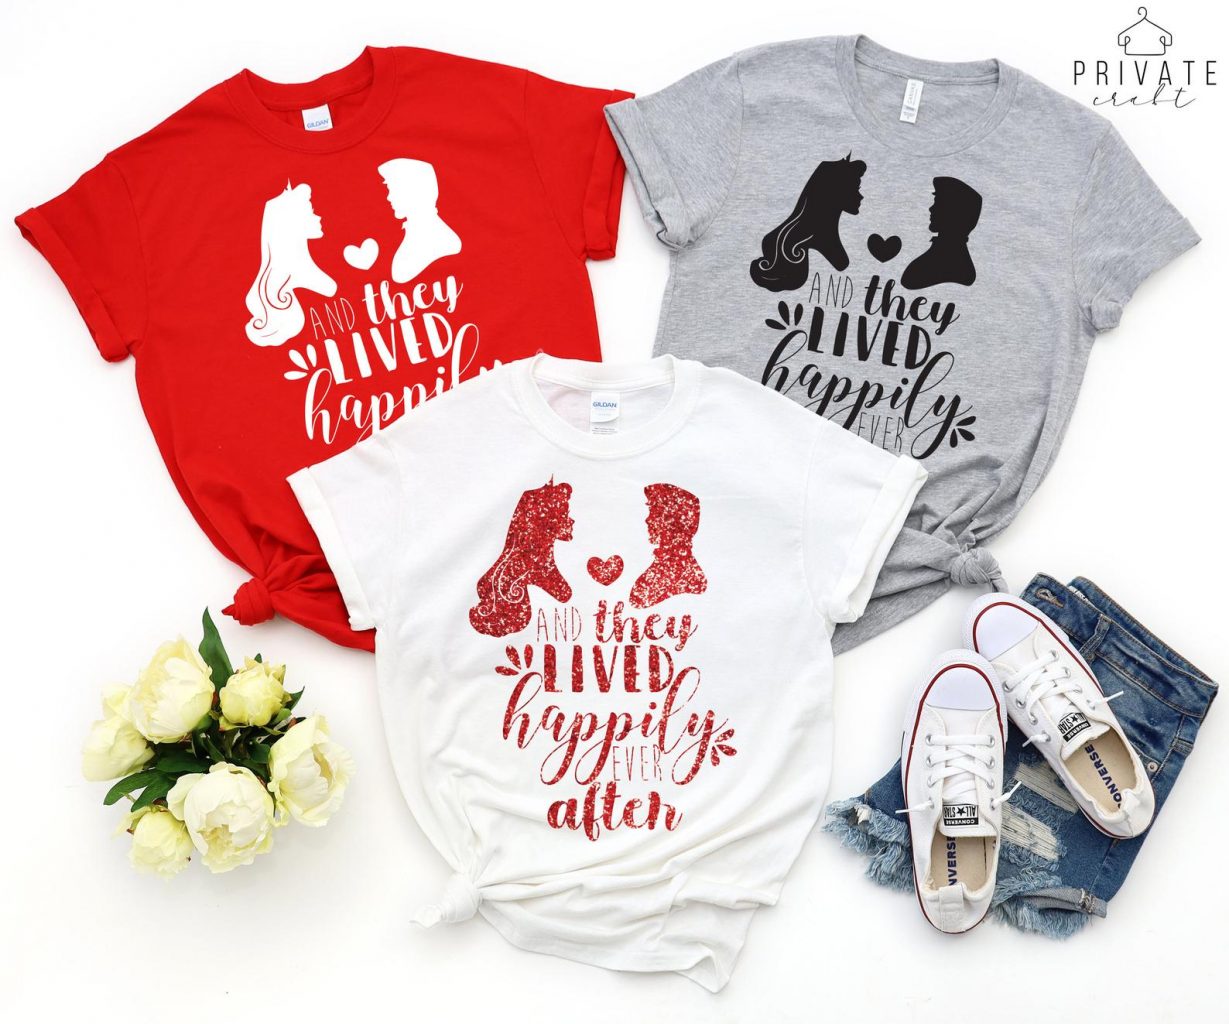 disney couple shirts happily ever after sleeping beauty Prince Charming